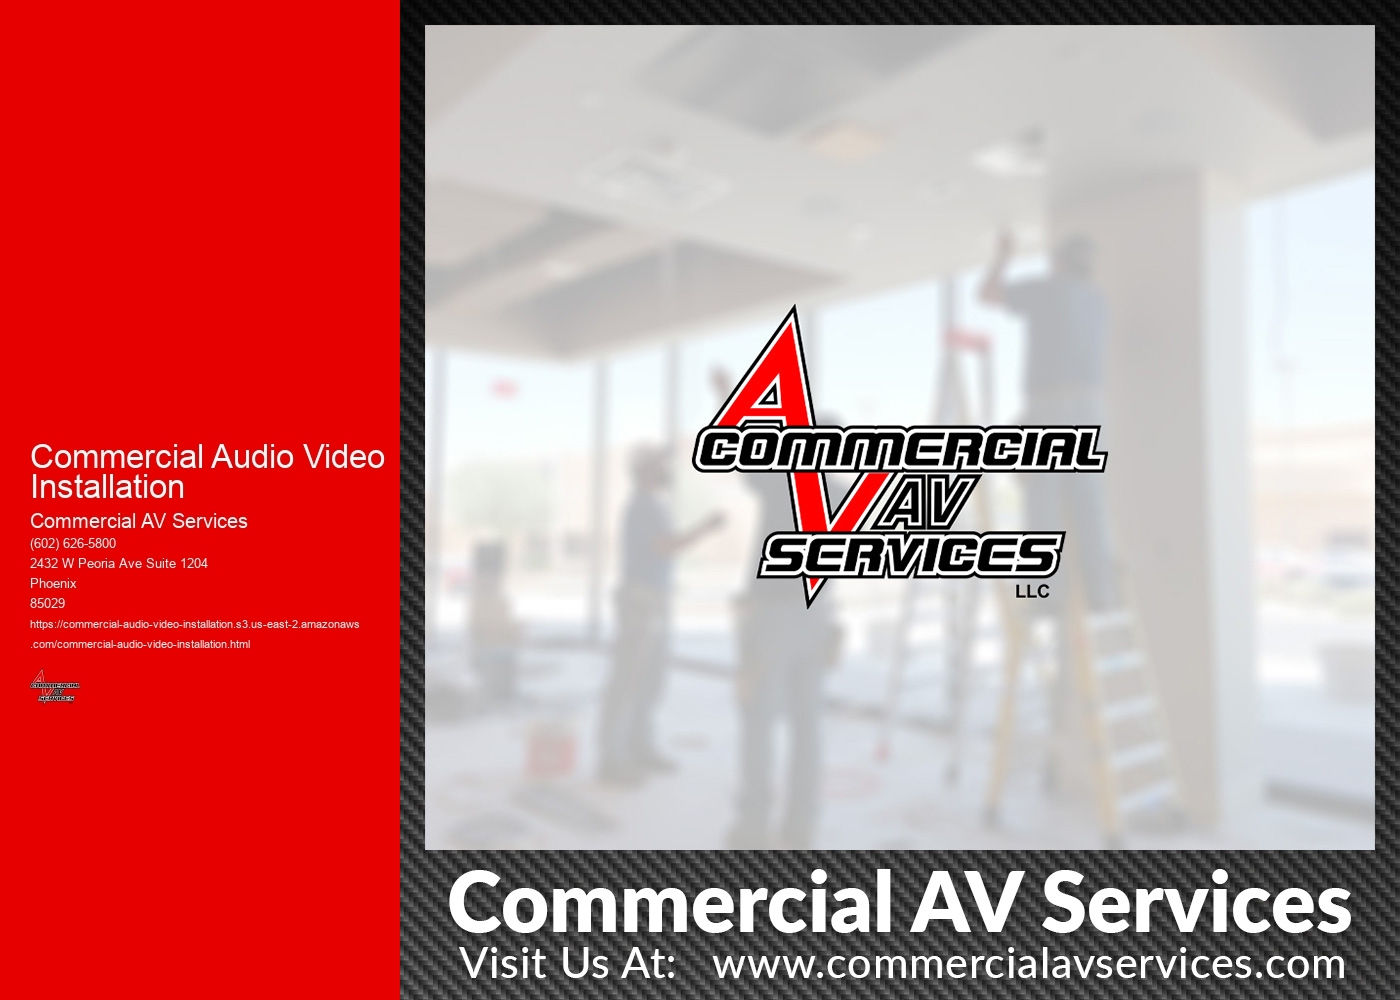 What are the best practices for maintaining and servicing commercial audio video systems to ensure optimal performance and longevity?